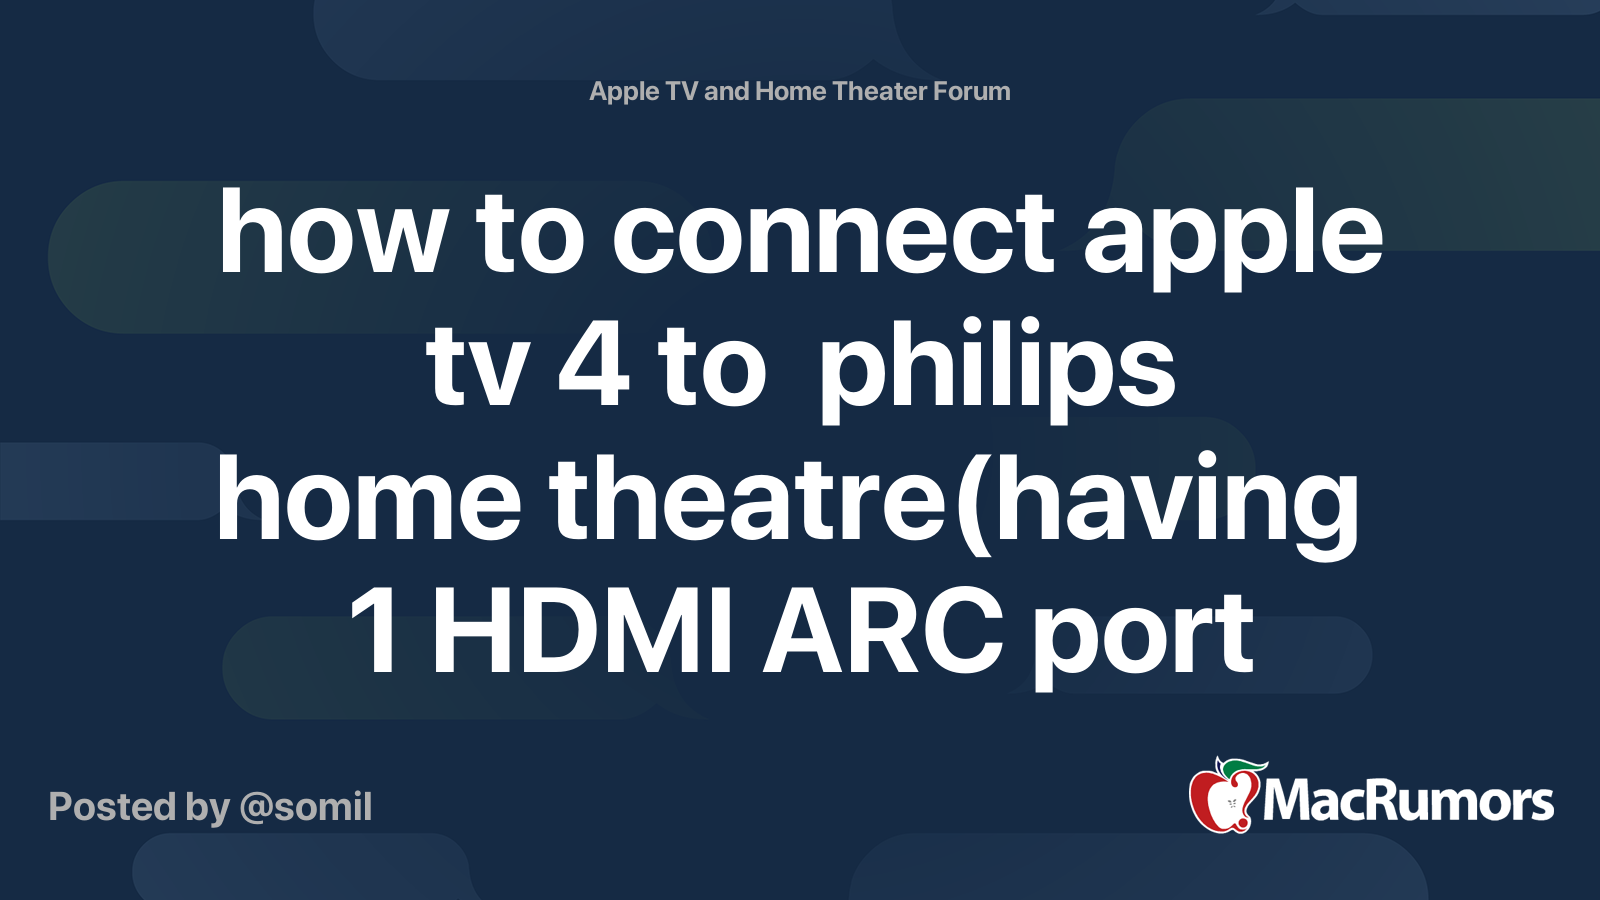 Som svar på Samme ske how to connect apple tv 4 to philips home theatre(having 1 HDMI ARC port  only) and to tv 3 HDMI po | MacRumors Forums